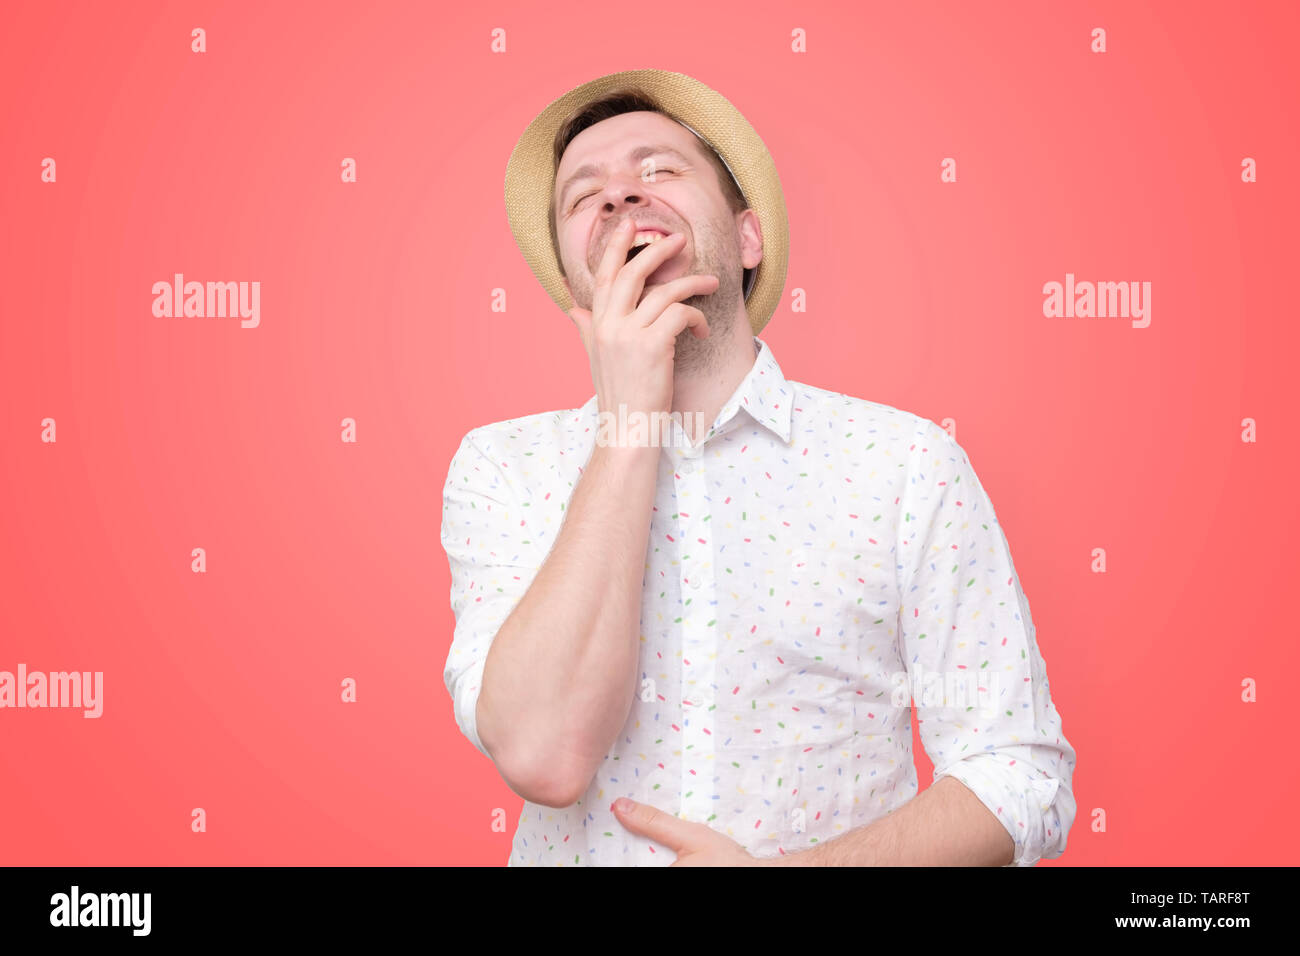 man in summer hat laughs loud on red wall Stock Photo